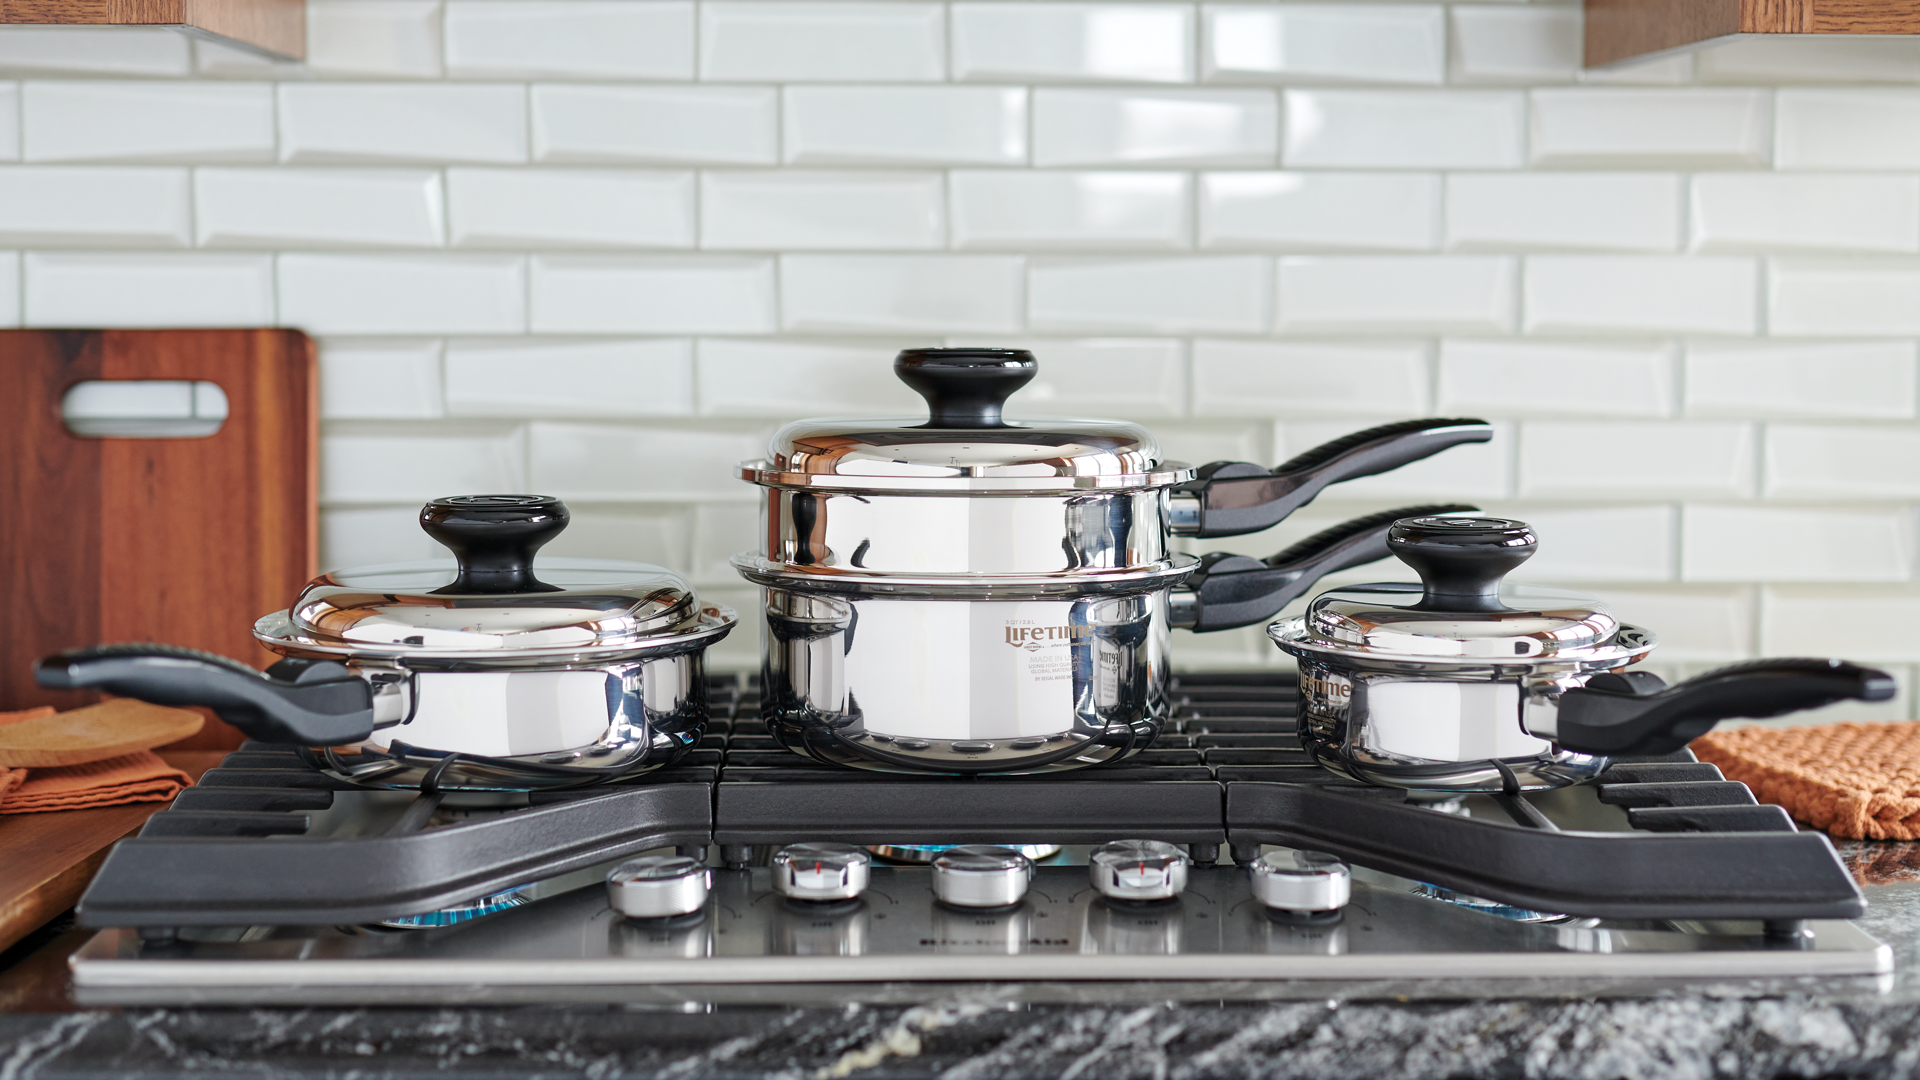 Three Lifetime Cookware Pots on a Stovetop